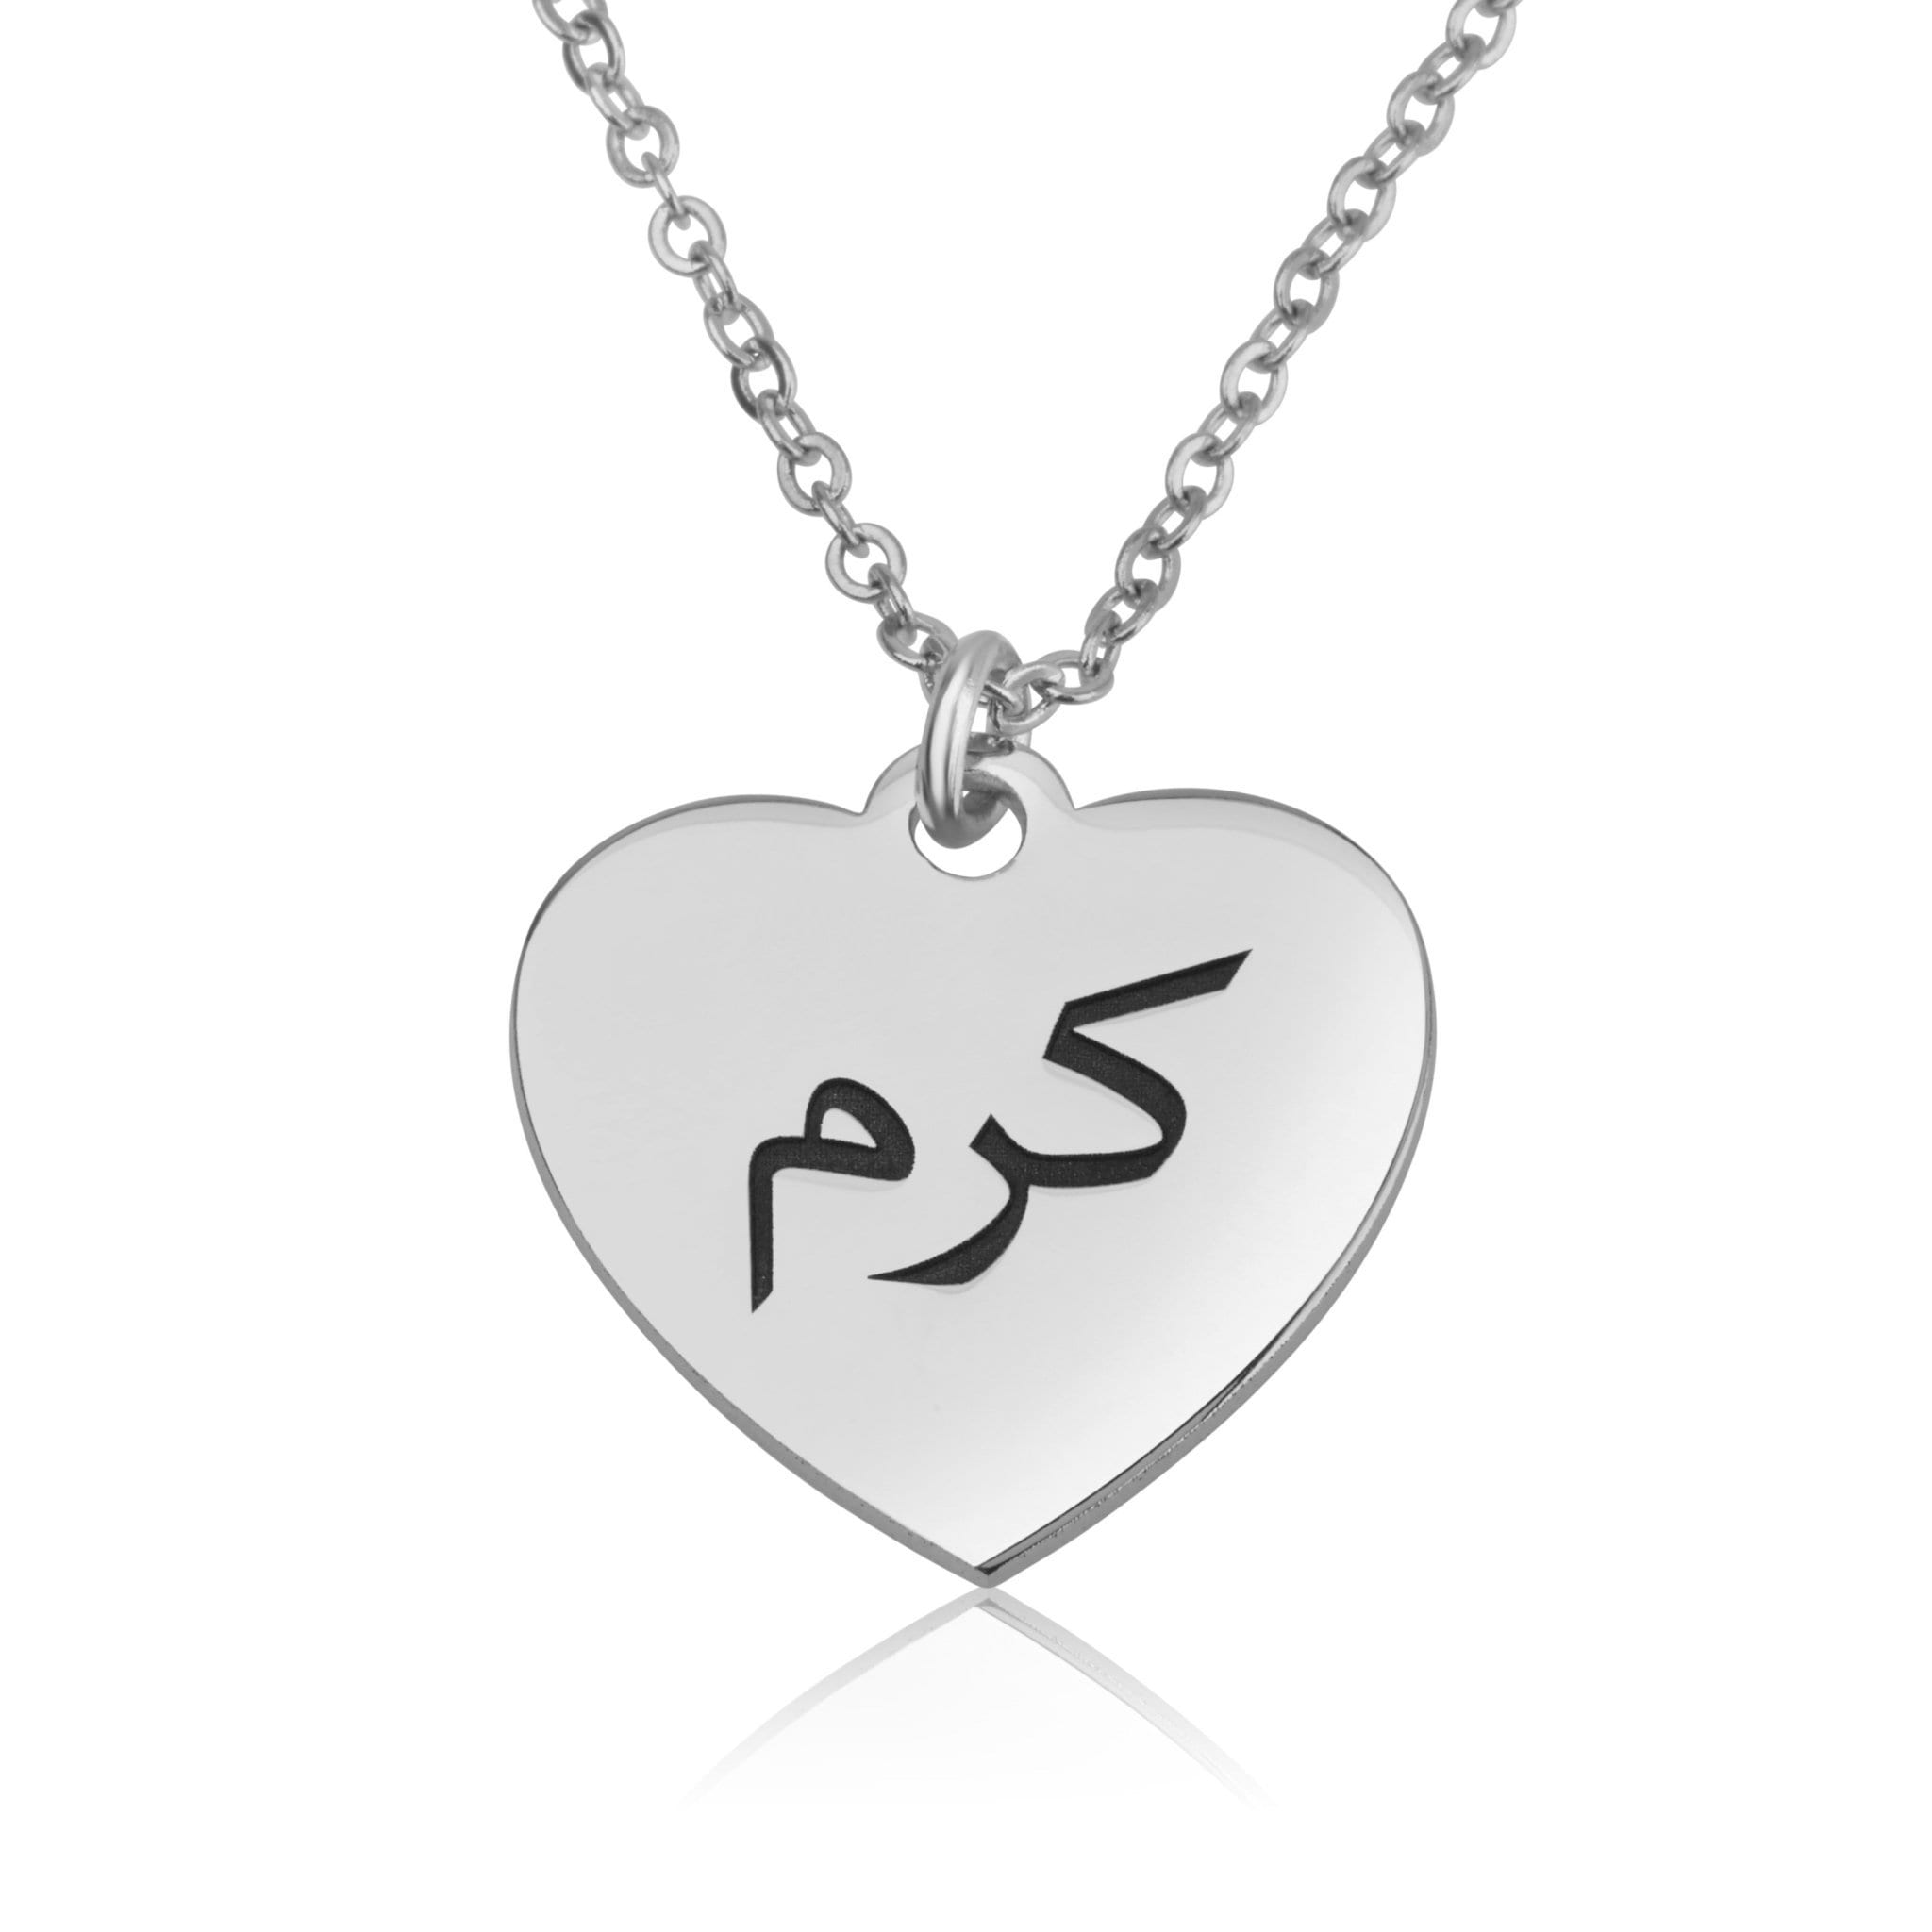 Heart Shaped Necklace With Arabic Name - Beleco Jewelry